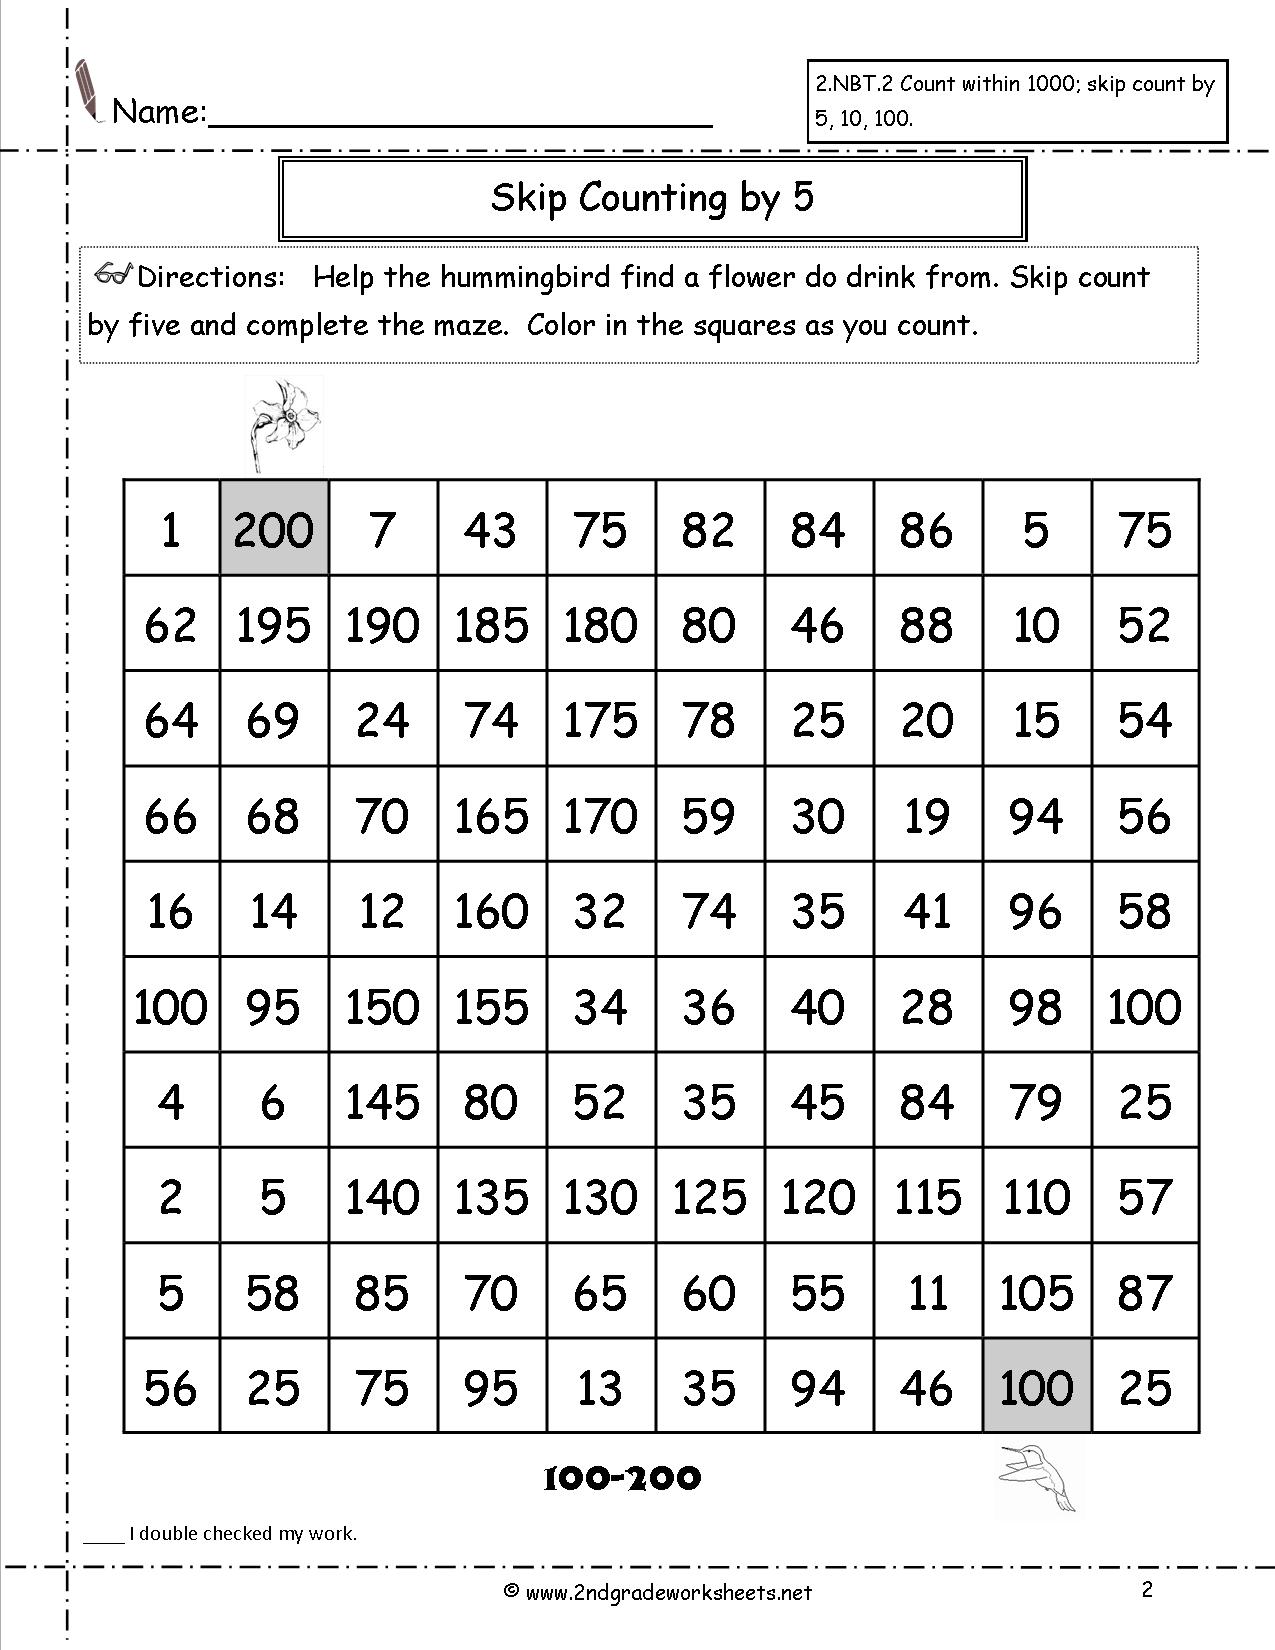 Skip Counting by 5 Worksheets Image